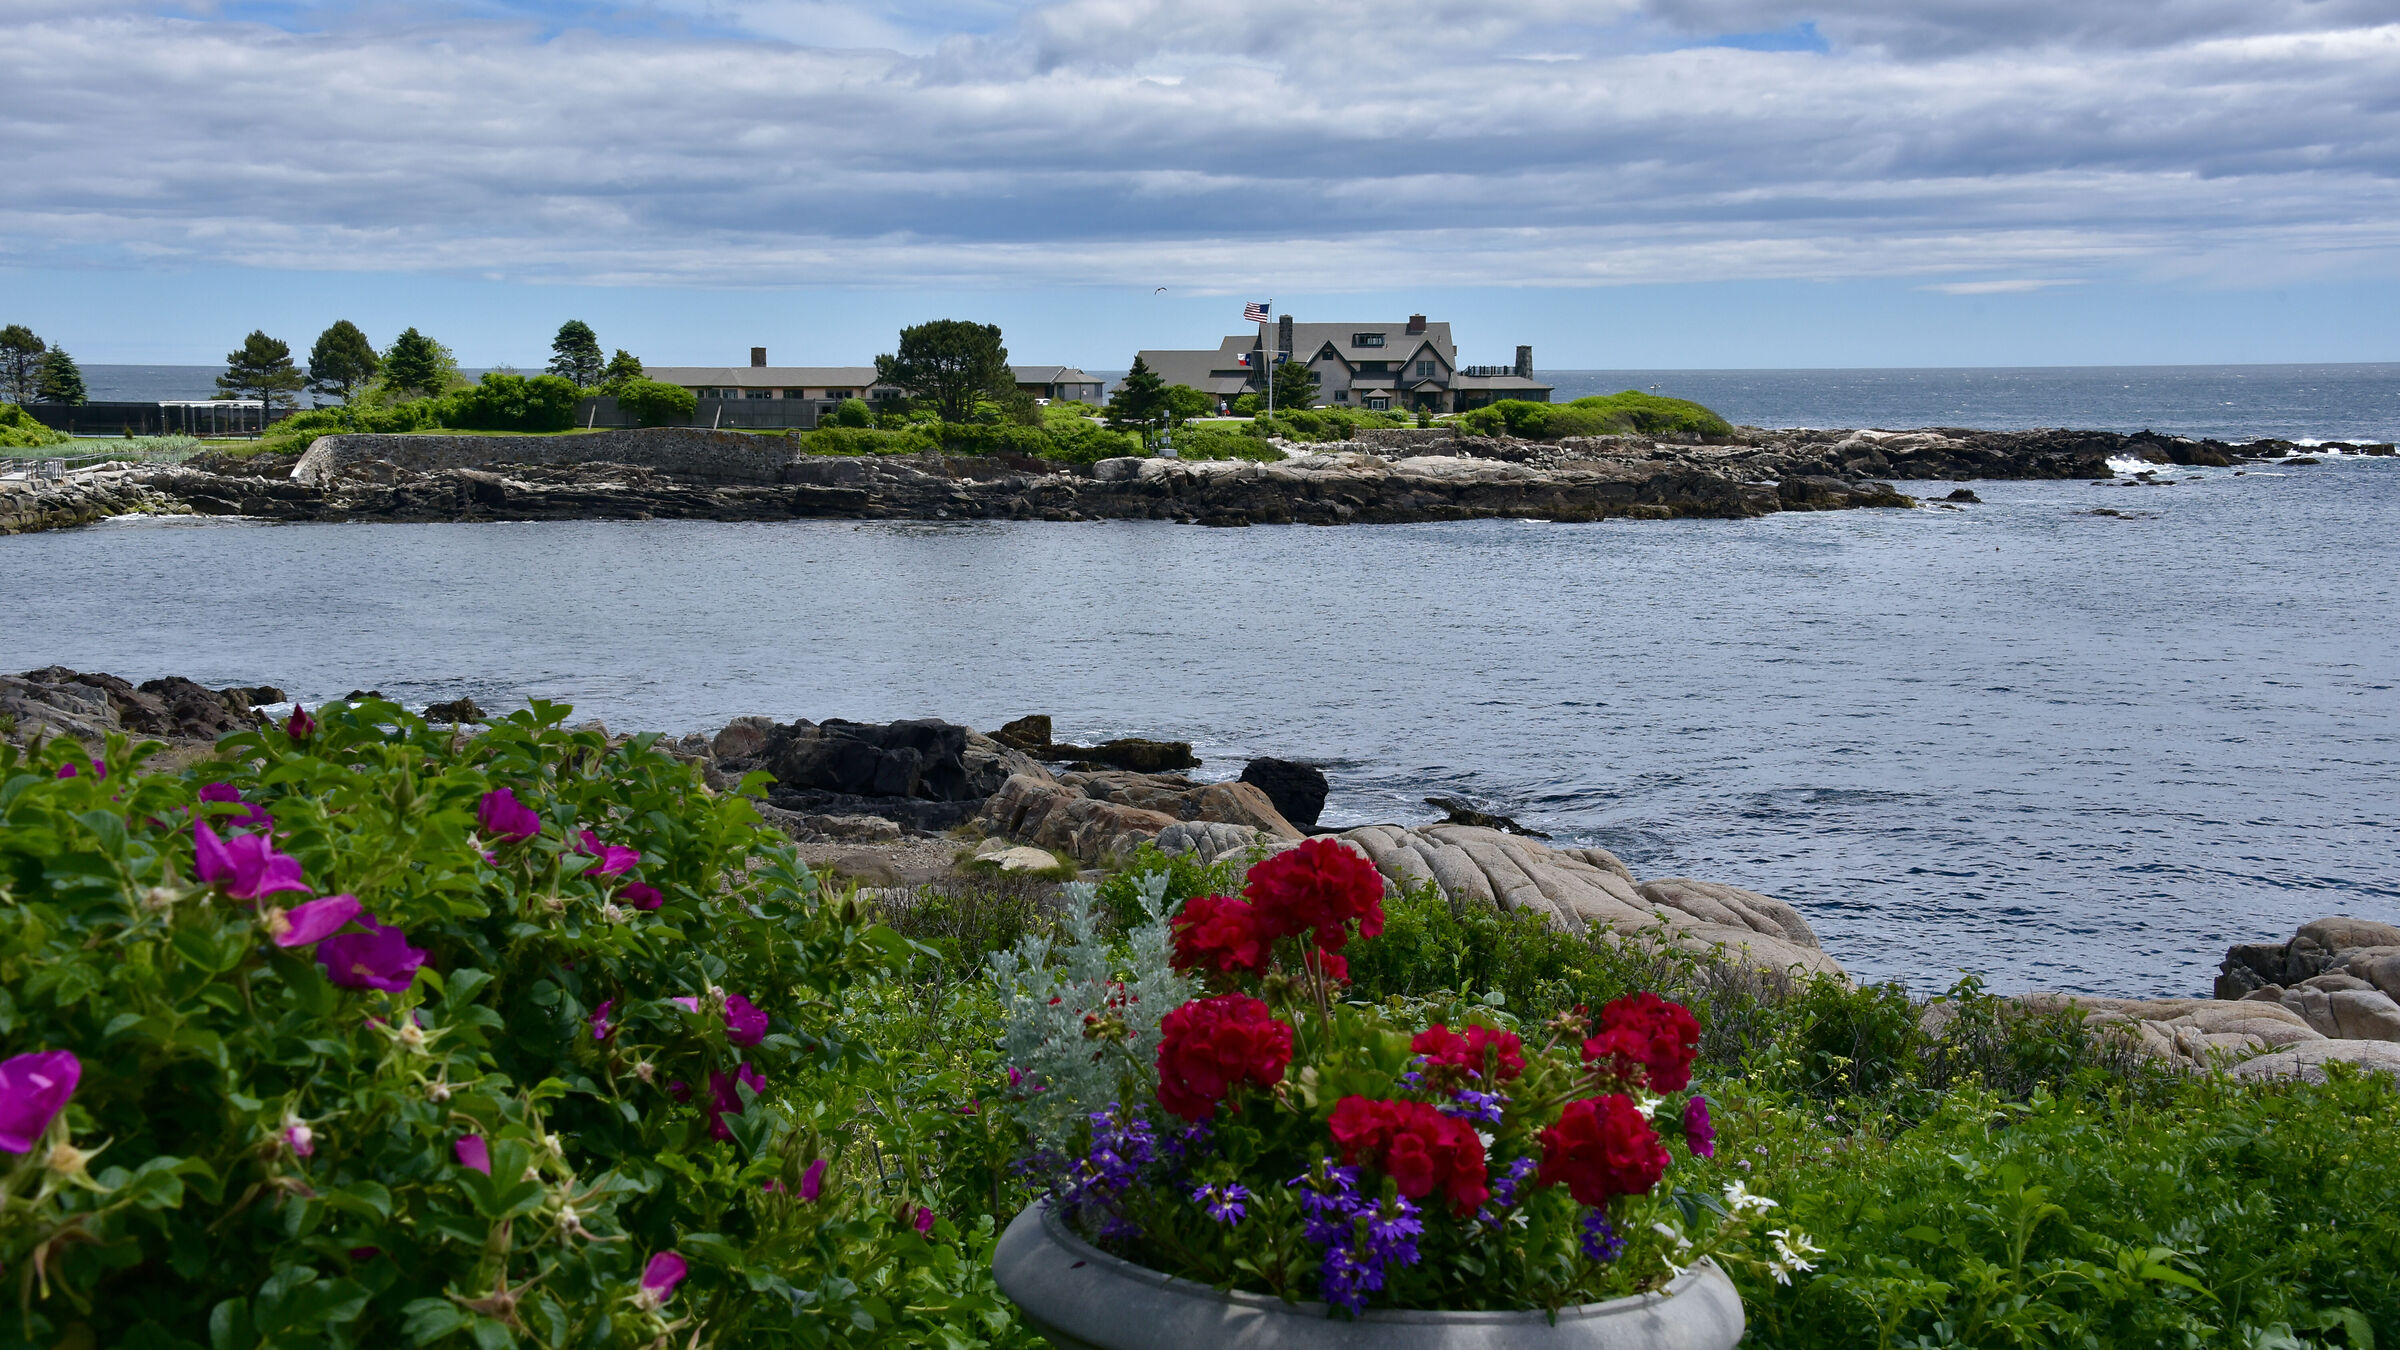 Magnificent home in Kennebunkport Maine of George Bush...